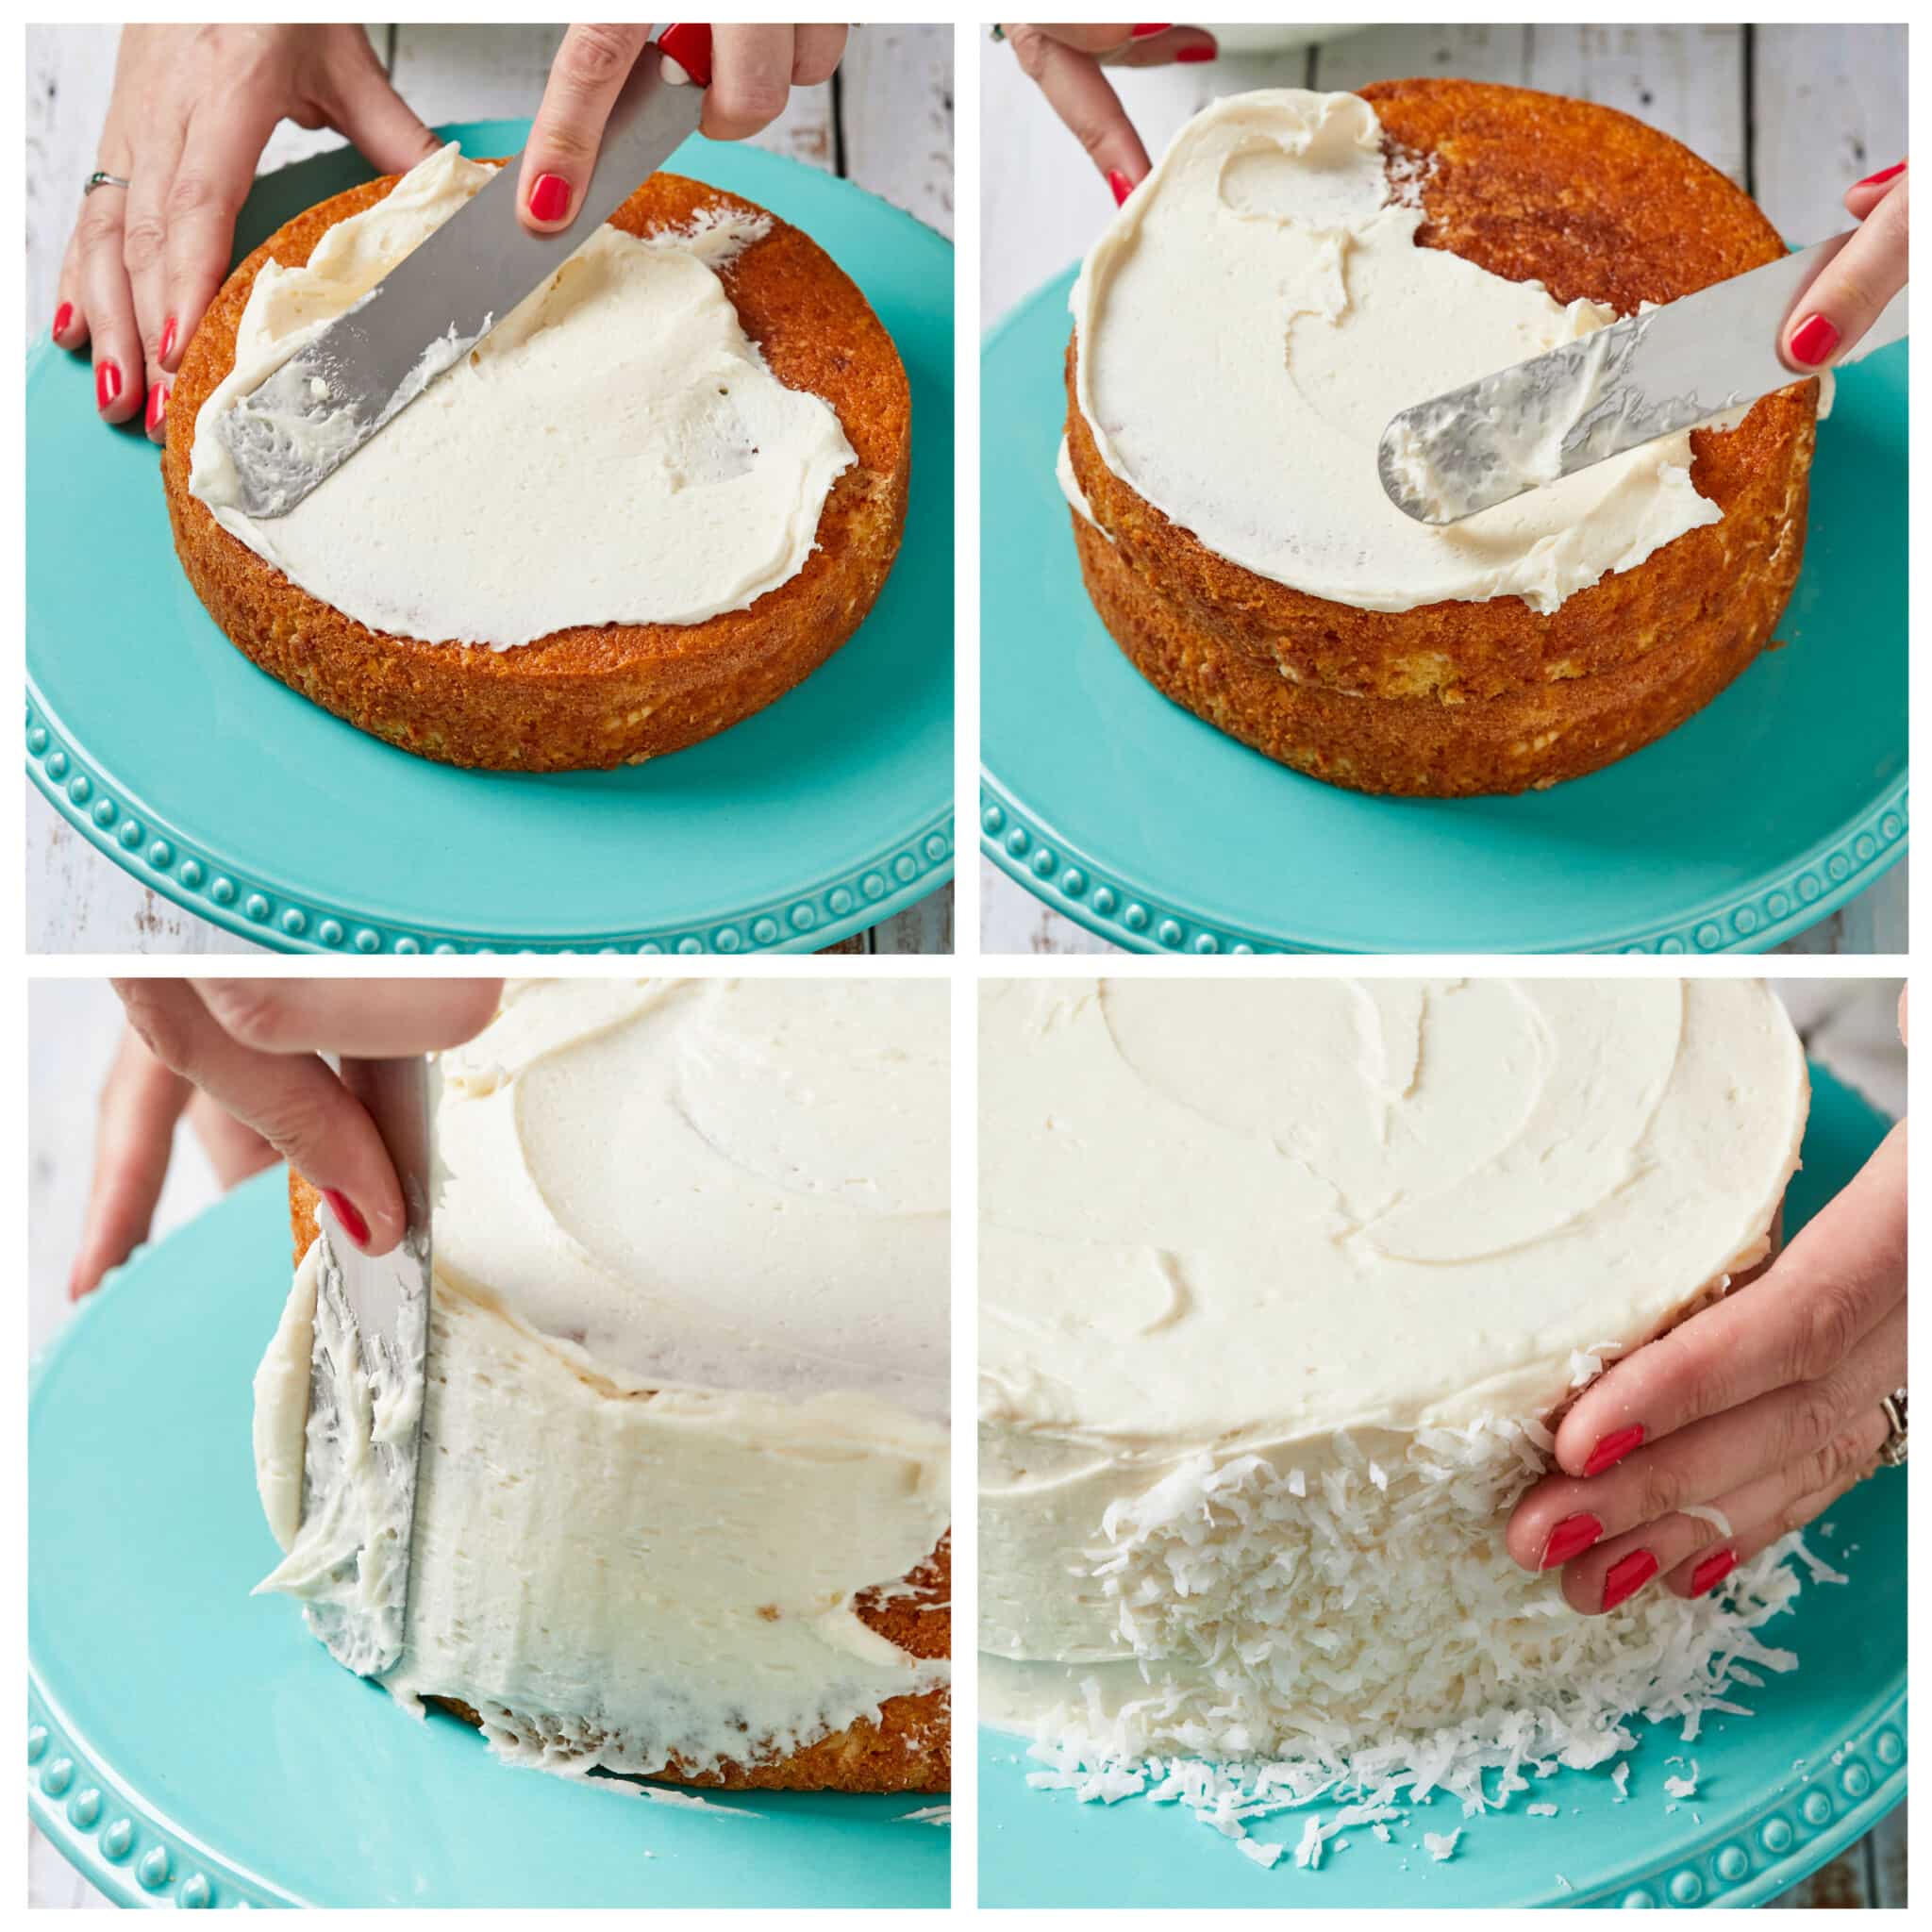 Decorating the cake with smooth cream cheese frosting between layers and on the sides and the top. covering the outside with toasted coconut flakes . 